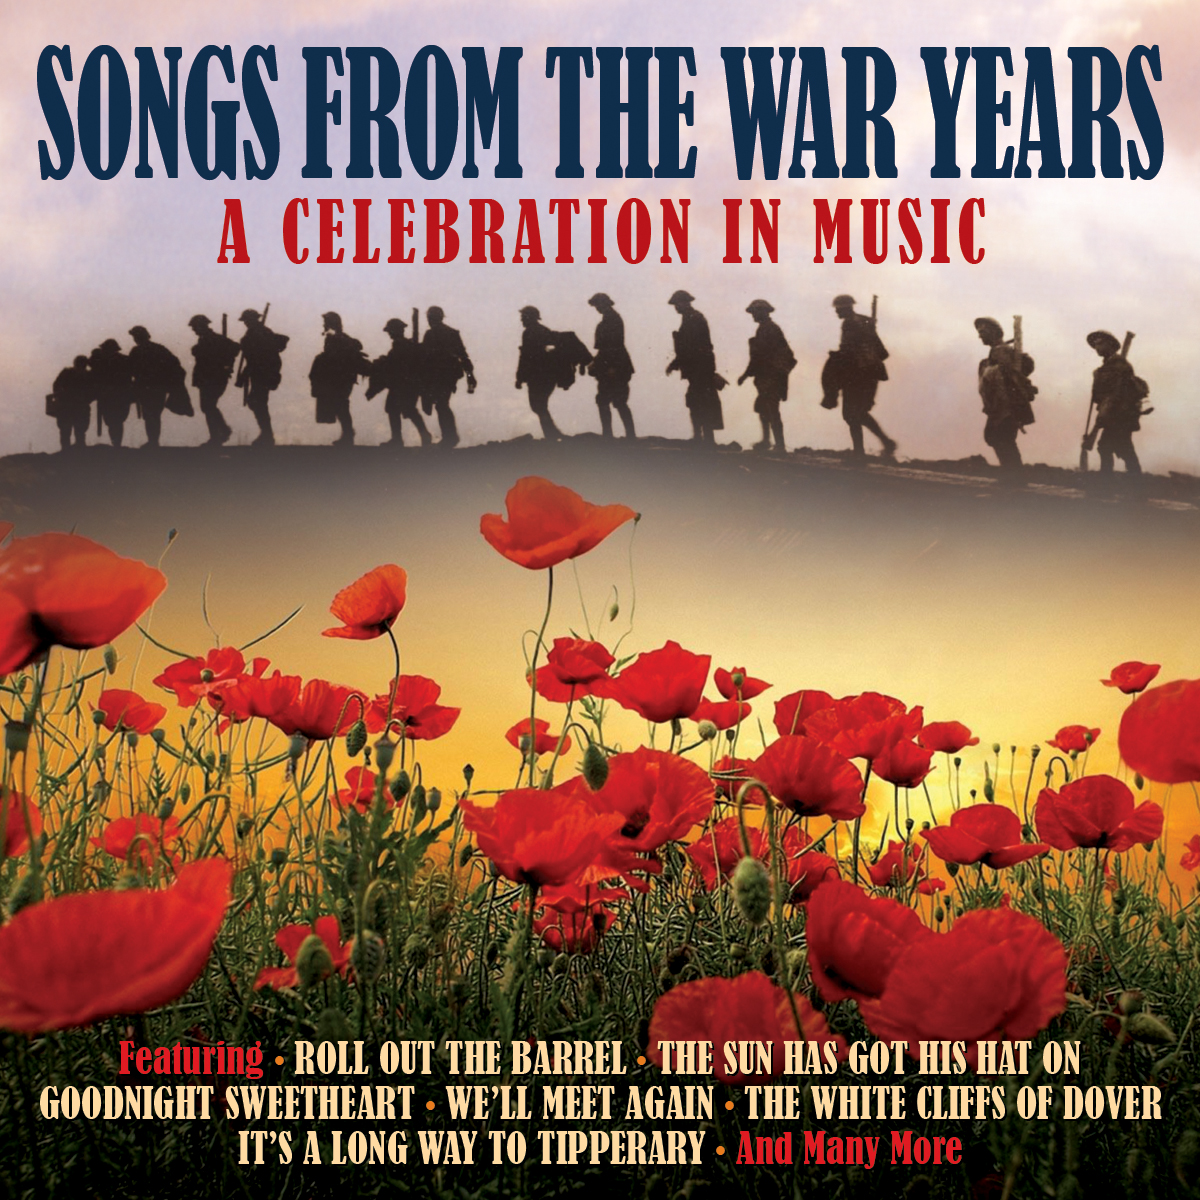 VARIOUS ARTISTS - SONGS FROM THE WAR YEARS: A CELEBRATION IN MUSIC 

DAY3CD053 - 3CD SET

Available now at:
amazon.co.uk/Songs-War-Year…

#DAY3CD053 #EasyListening #GlennMiller #Jazz #OneDayMusic #notnowmusicltd #pop #THEANDREWSSISTERS #jazz #TheInkSpots #VeraLynn